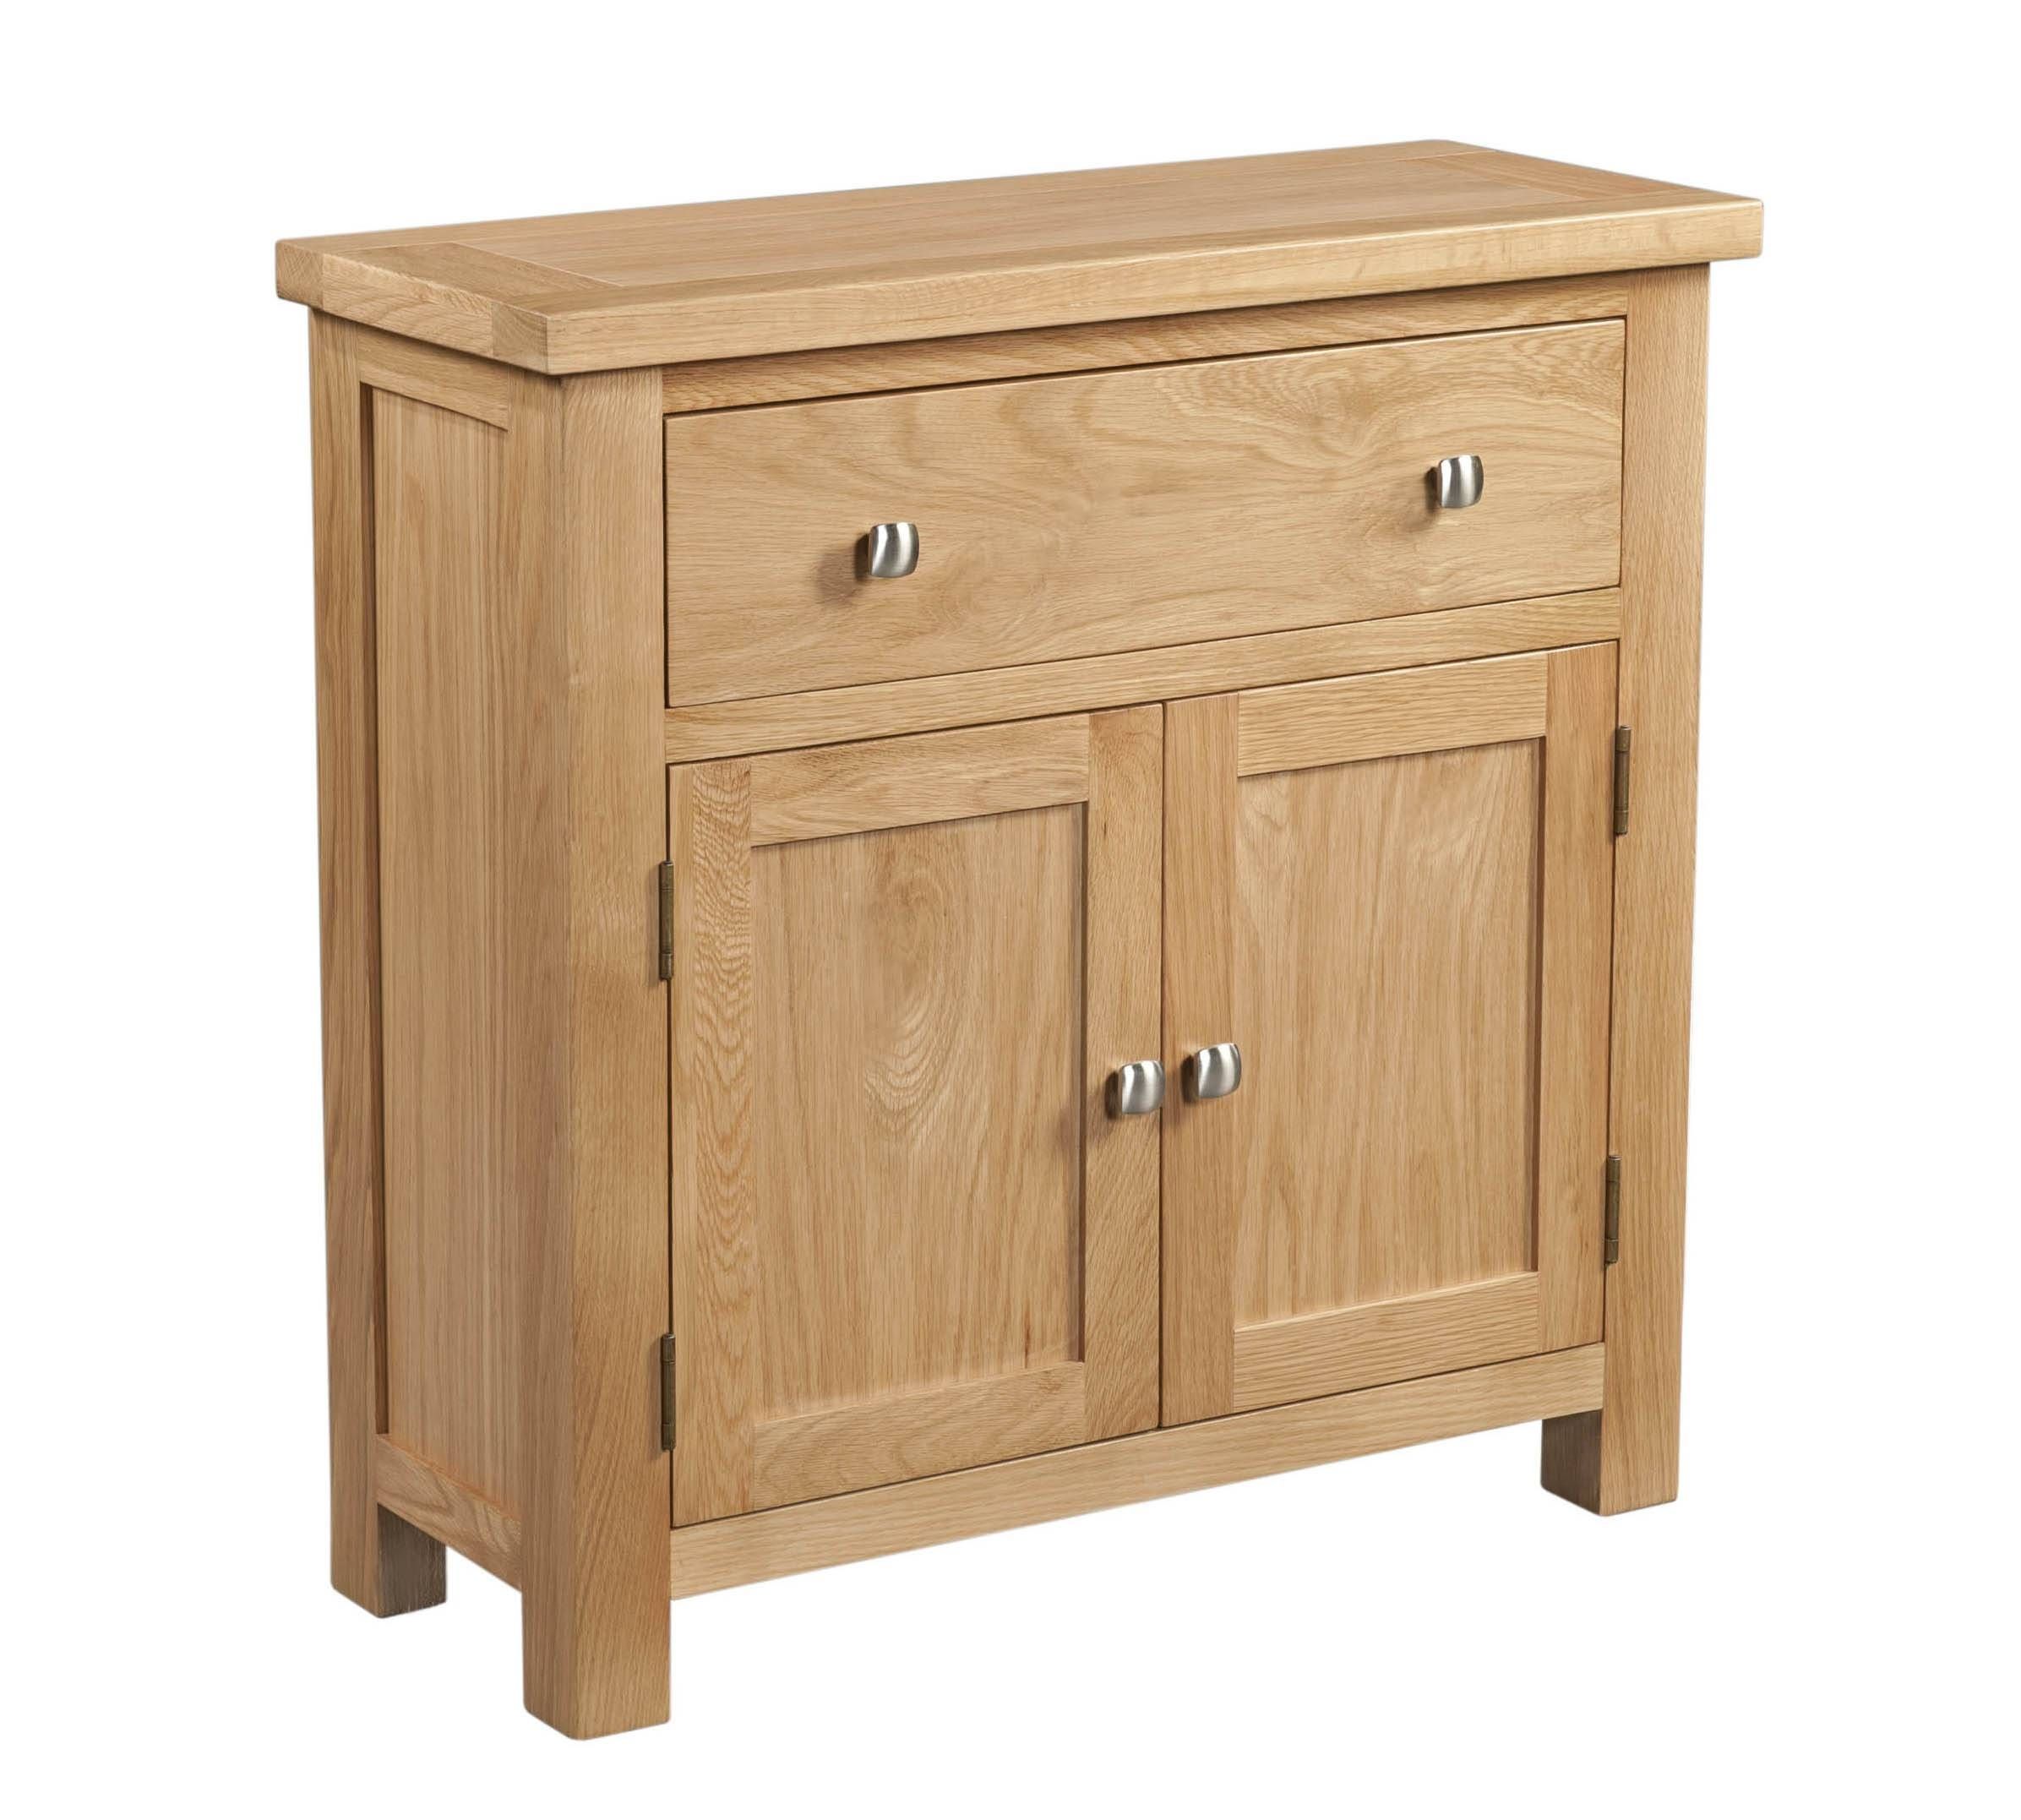 Dorset Small Oak Sideboarddorset Small Oak Sideboard – Branches Of With Regard To Small Wooden Sideboard (View 6 of 20)